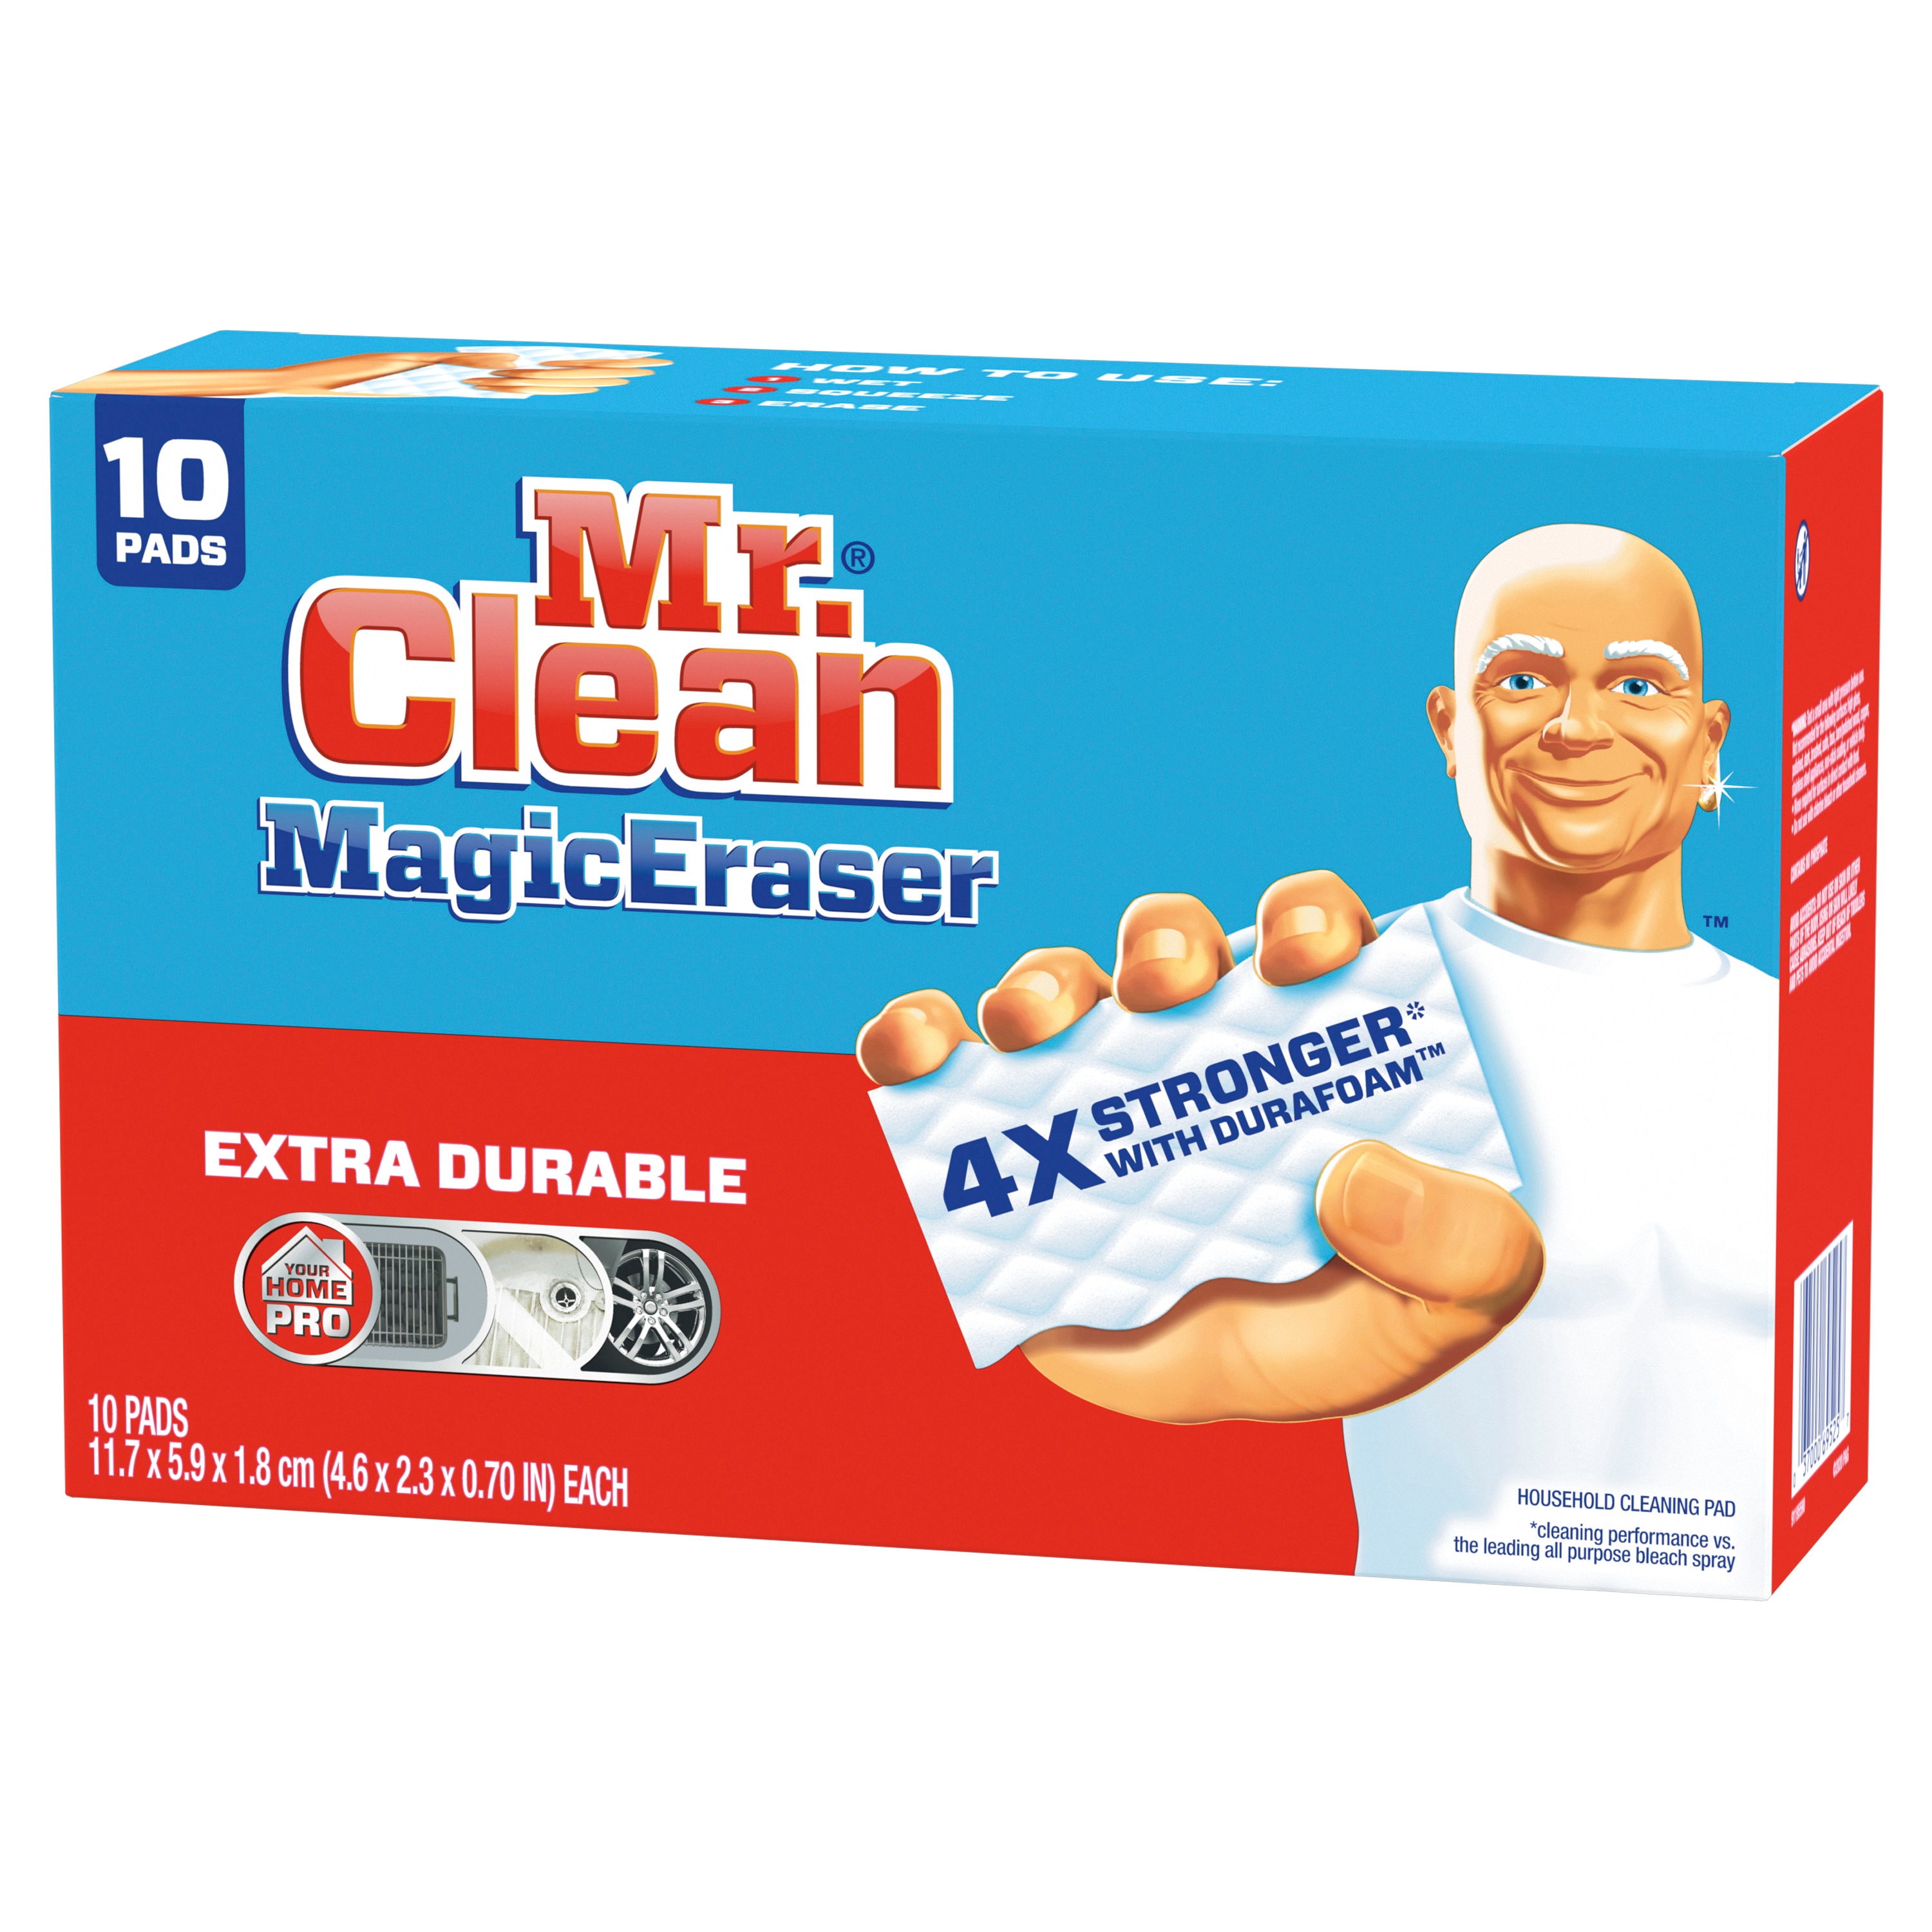 Get the best results with Magic eraser 4x stronger for removing tough stains